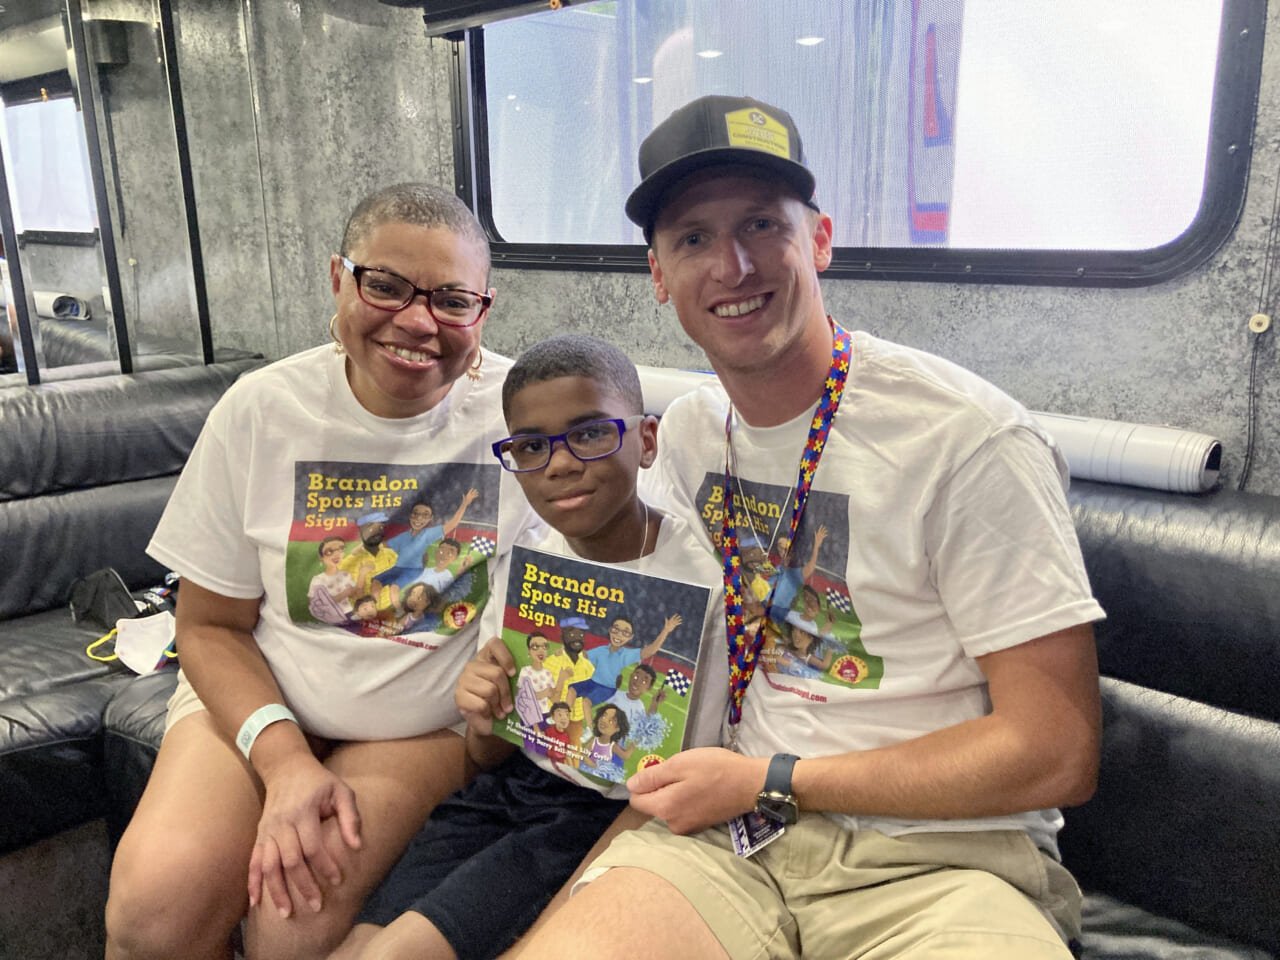 8-year-old Black boy from Minn. helps NASCAR racer put new spin on 'Let's go, Brandon'